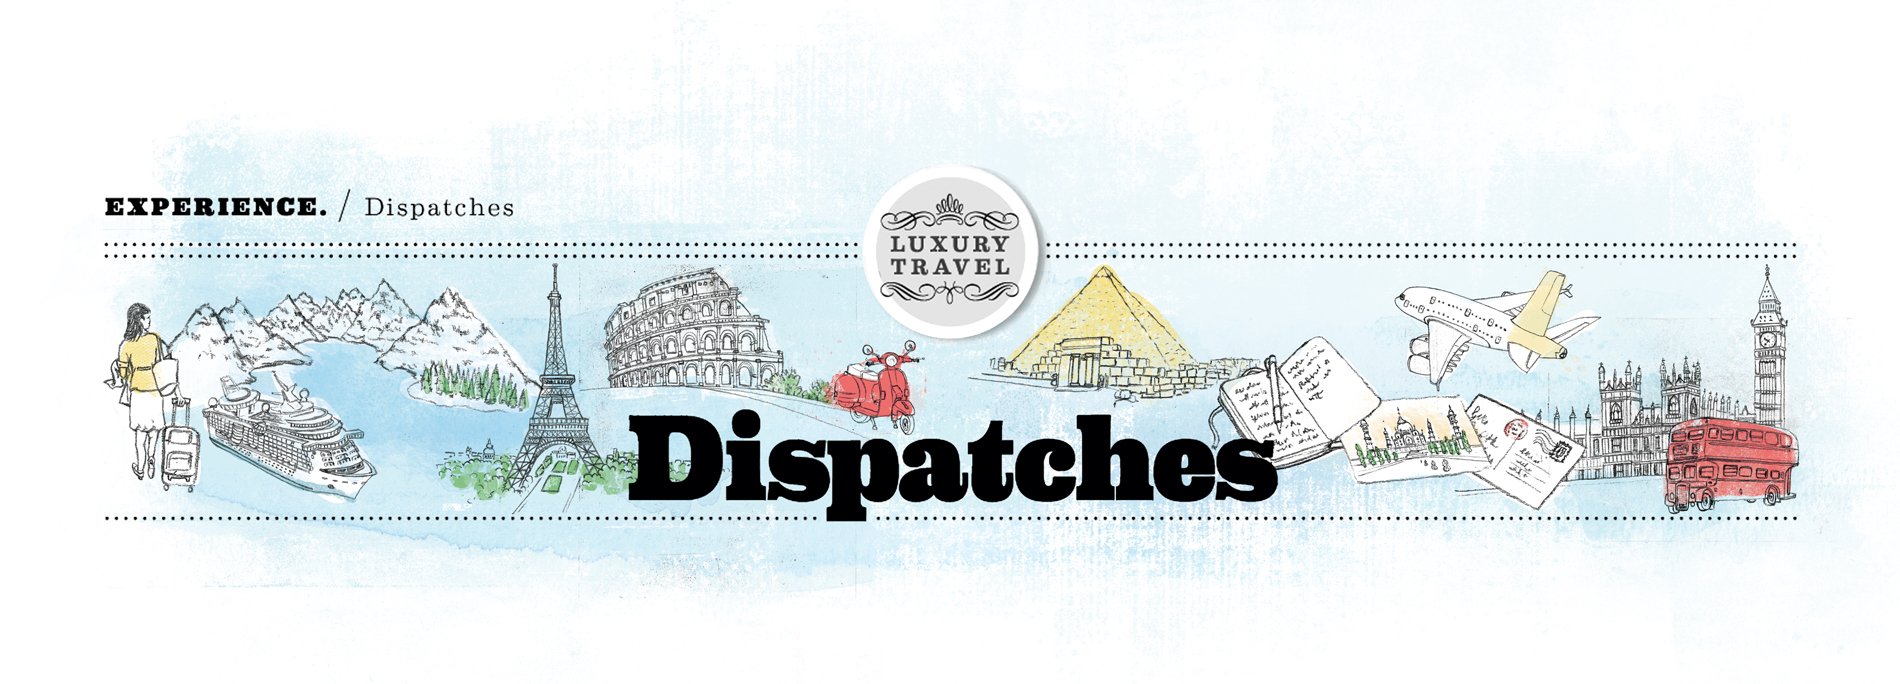 dispatches-EXPERIENCE_00.jpg